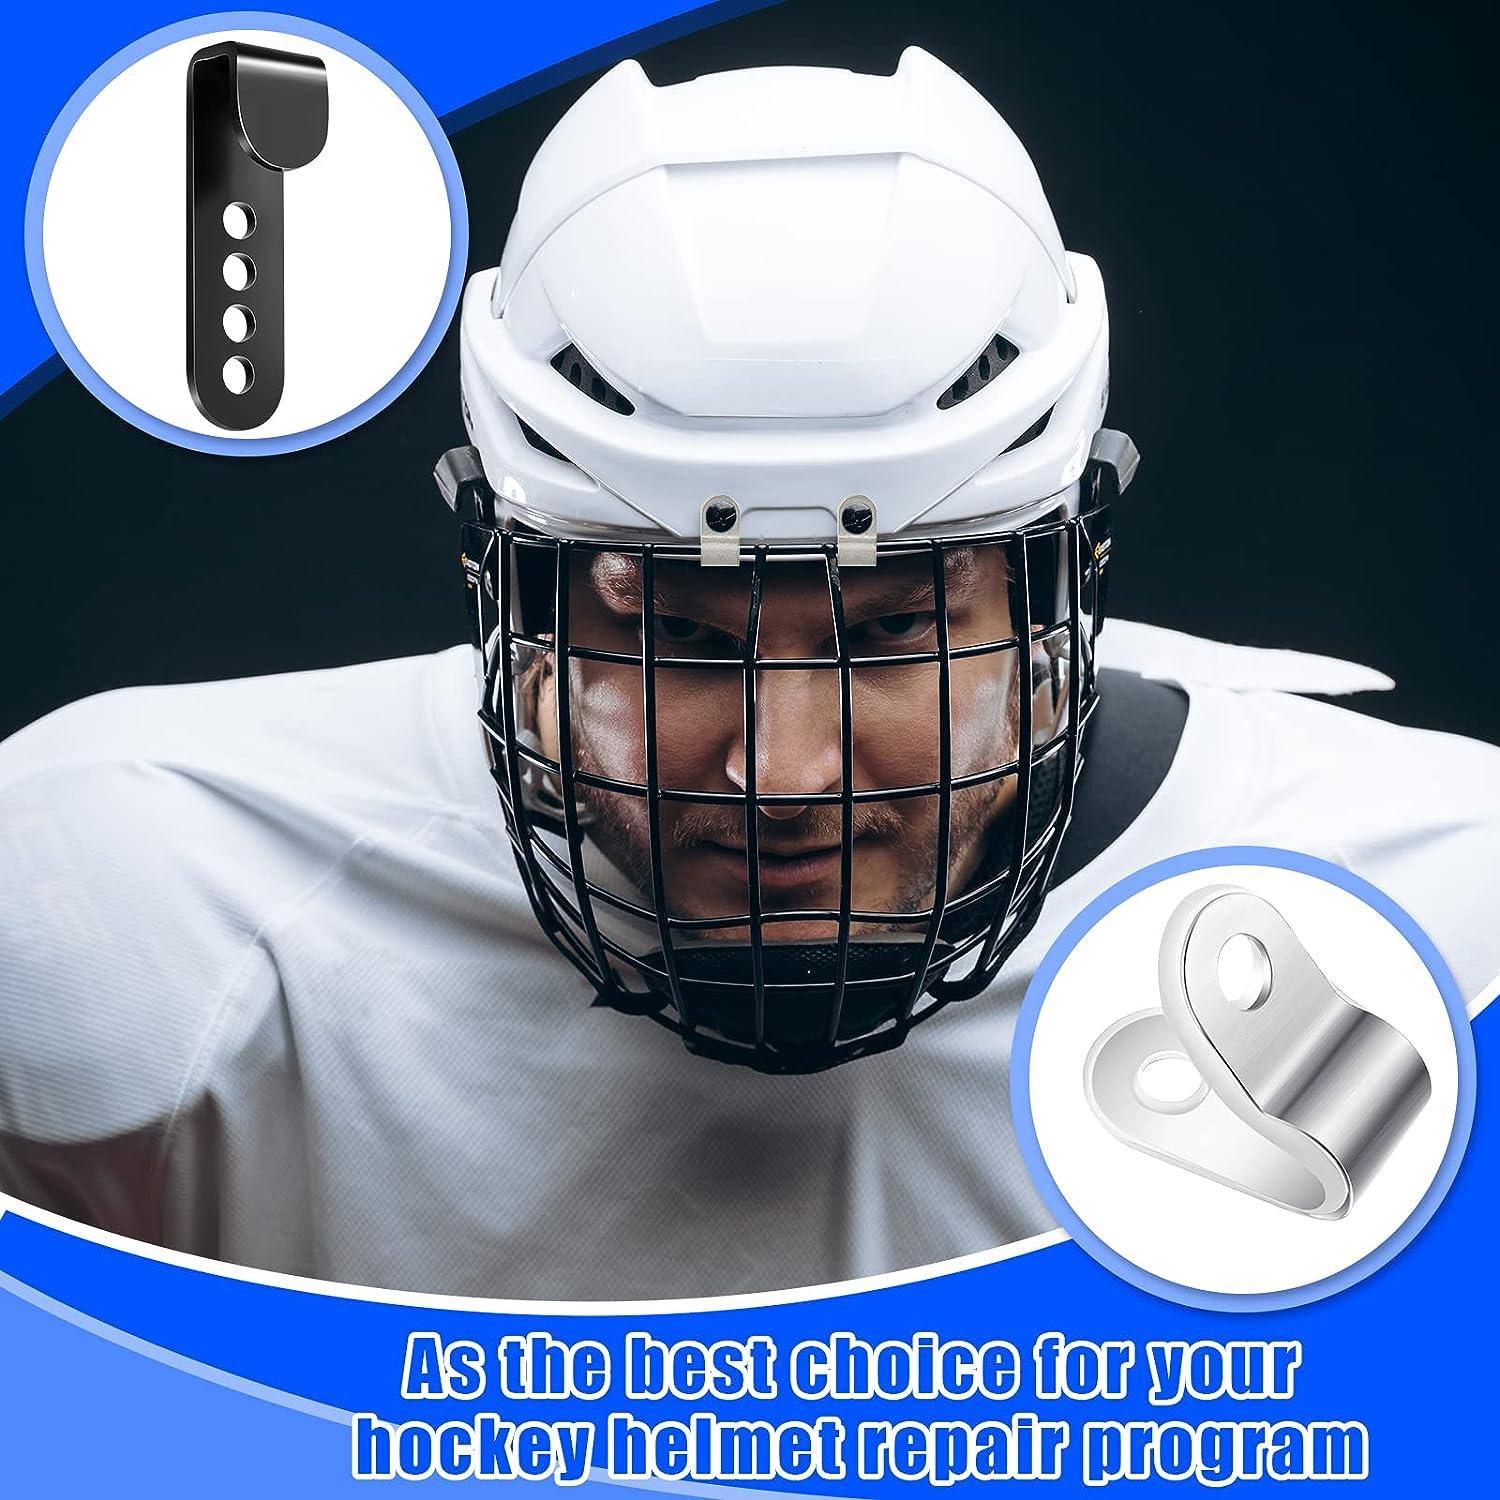 Universal Helmet Repair Kit with Clips for Hockey and Football Helmets